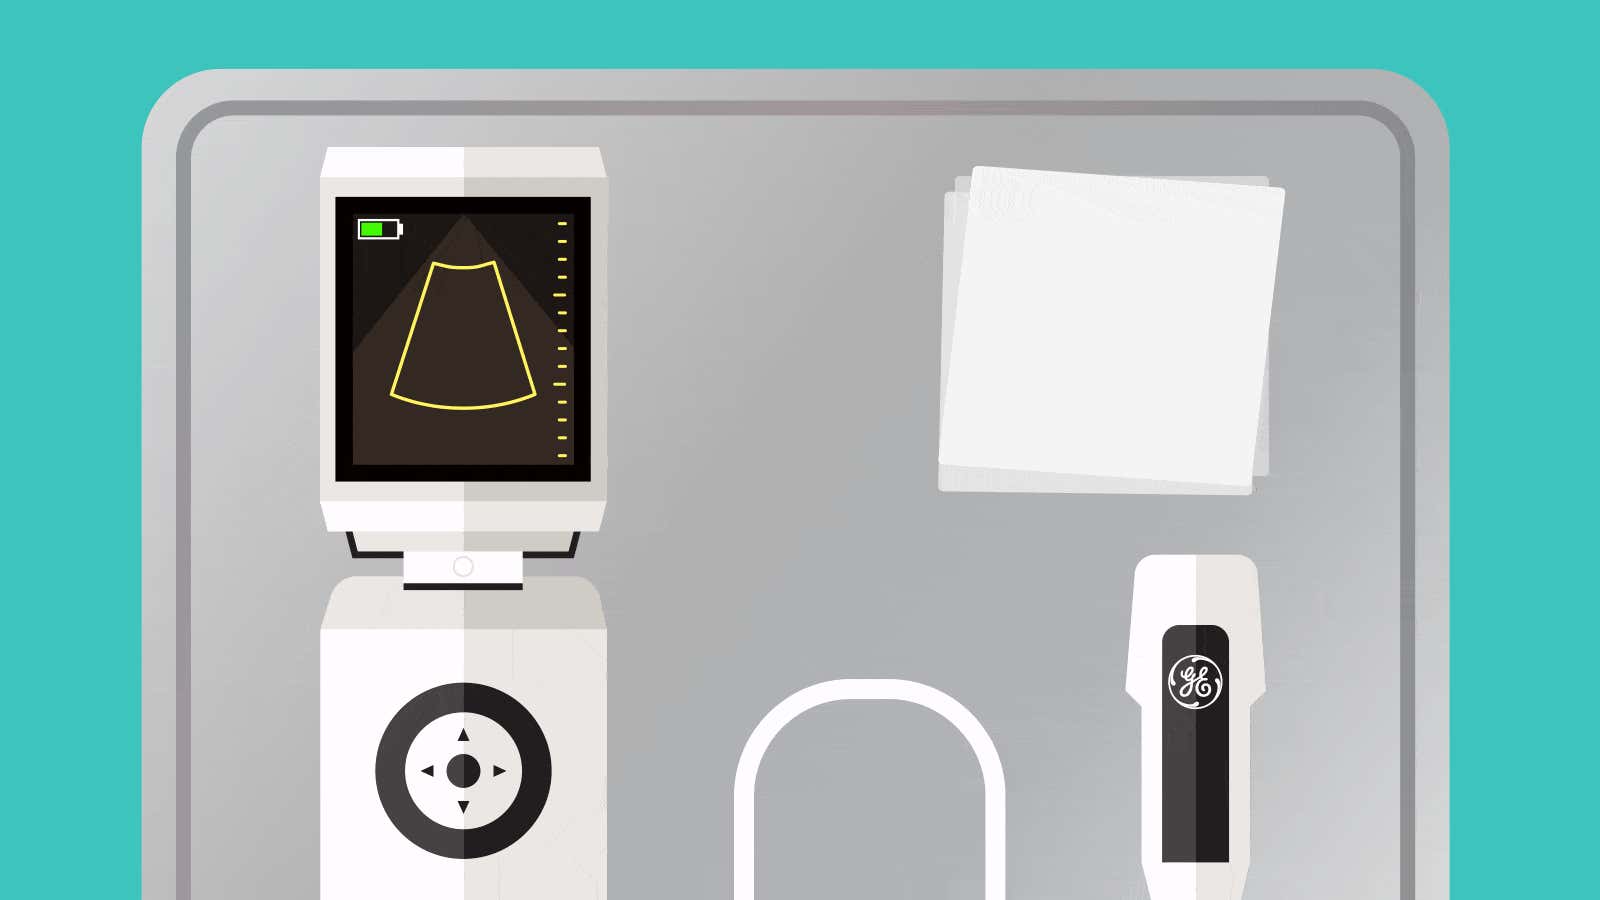 mHealth technological advancements include GE’s Vscan, the ultra-mobile, pocket-sized ultrasound device.